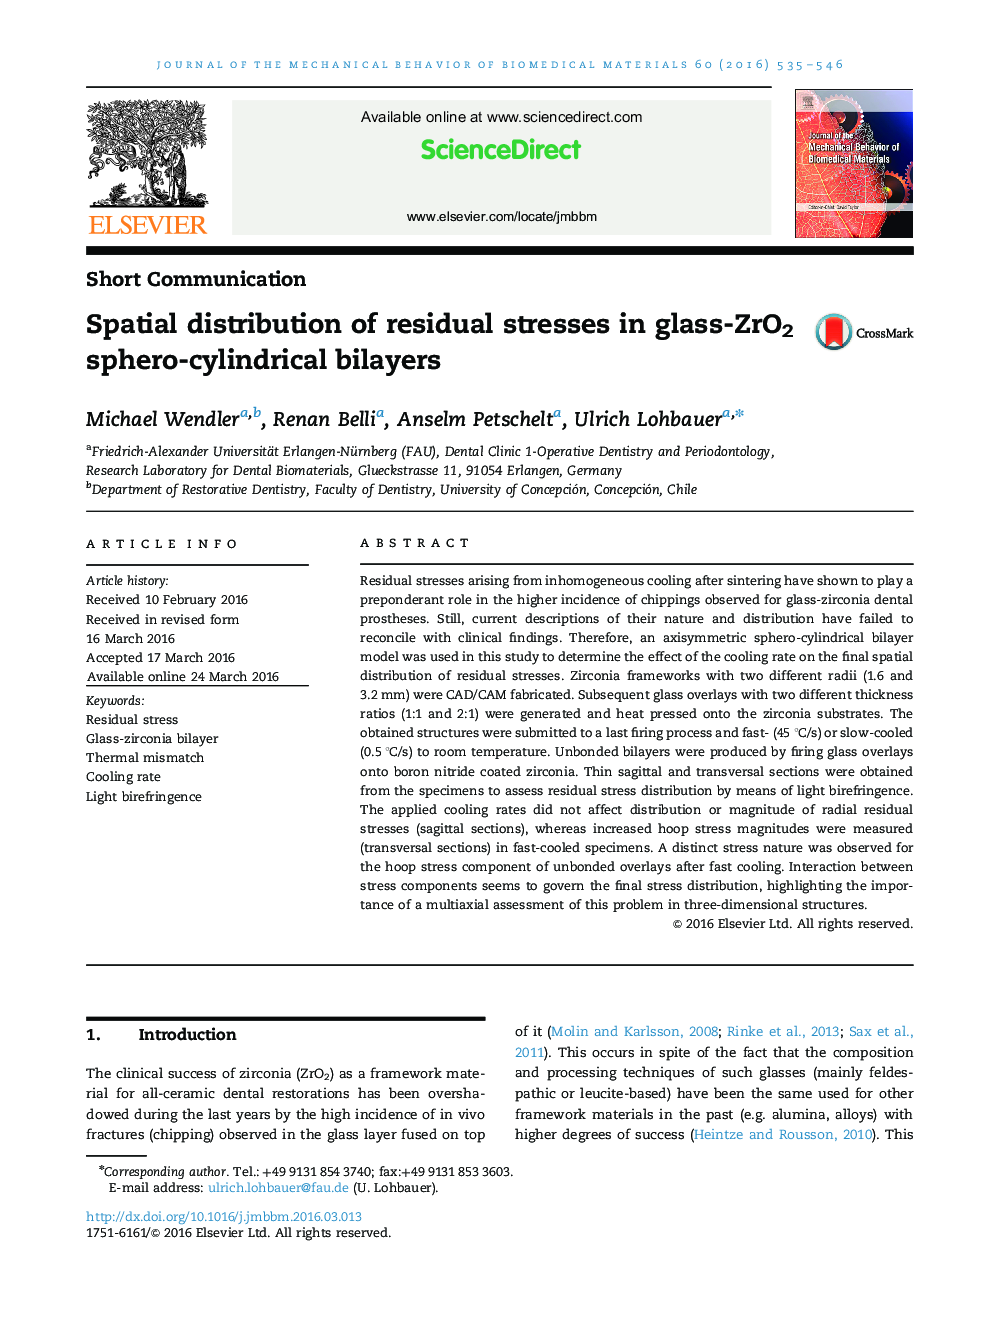 Spatial distribution of residual stresses in glass-ZrO2 sphero-cylindrical bilayers